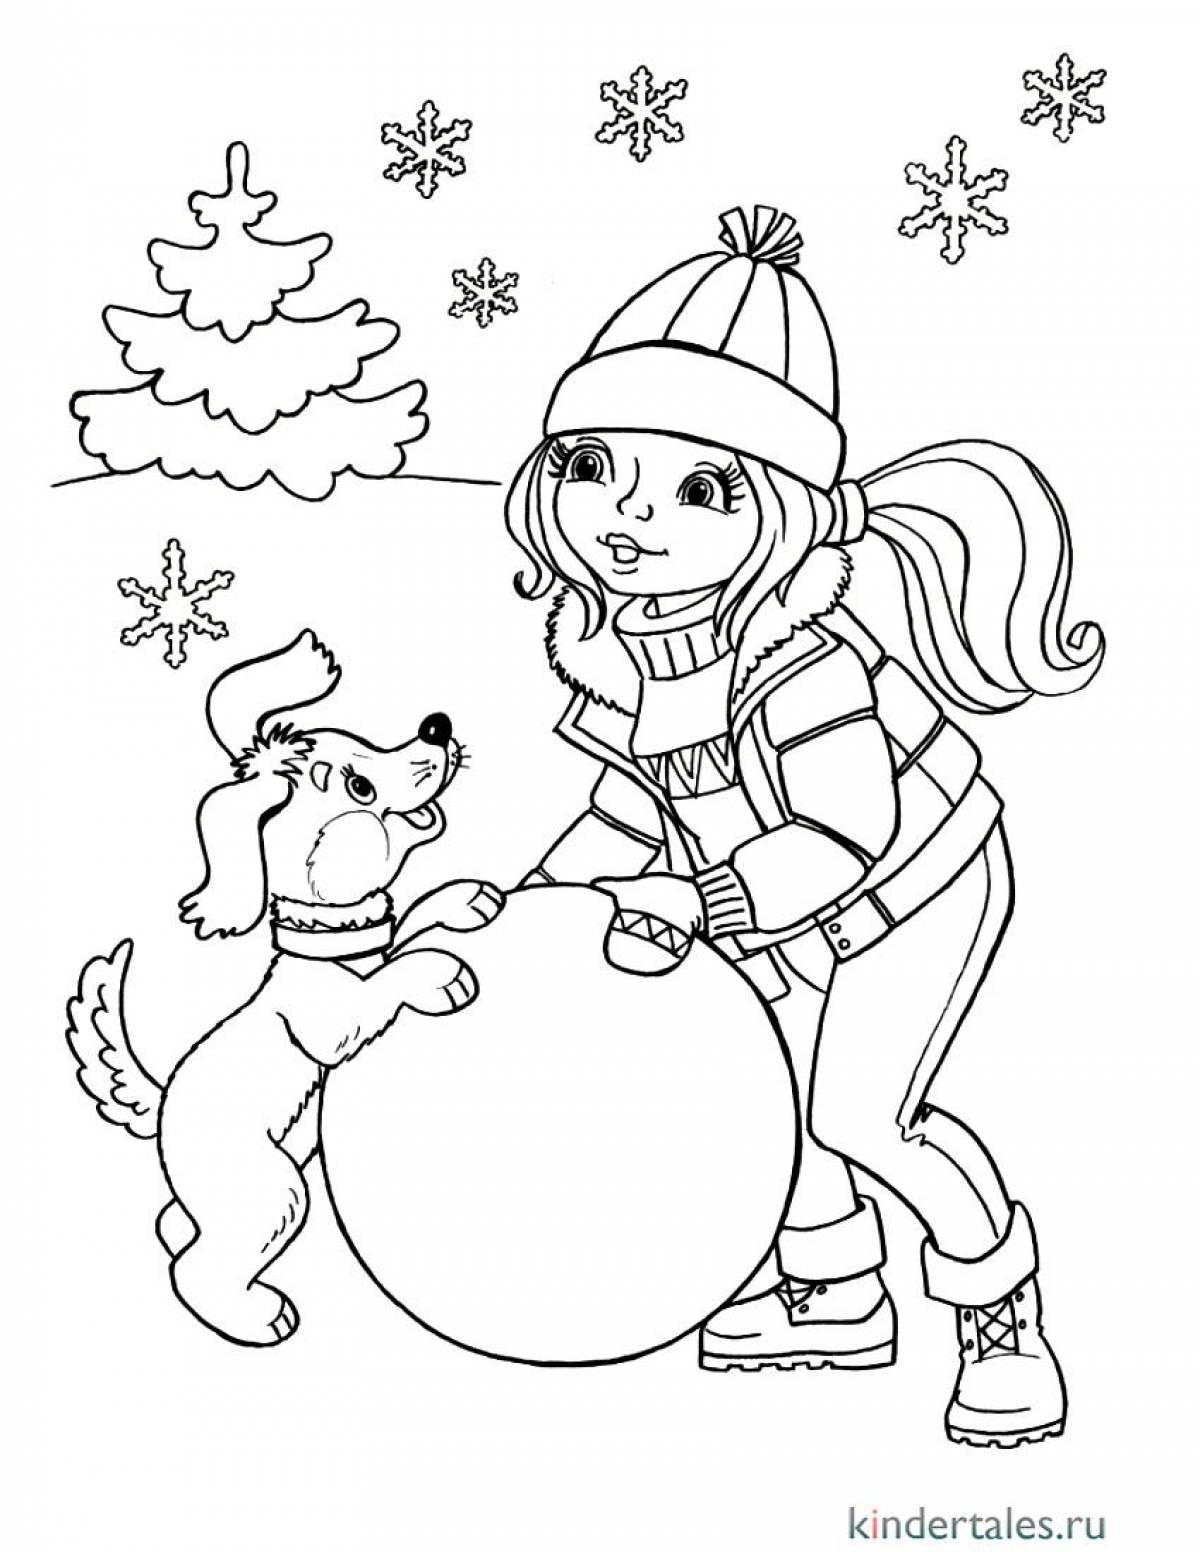 Fantastic winter coloring book for kids 5-6 years old